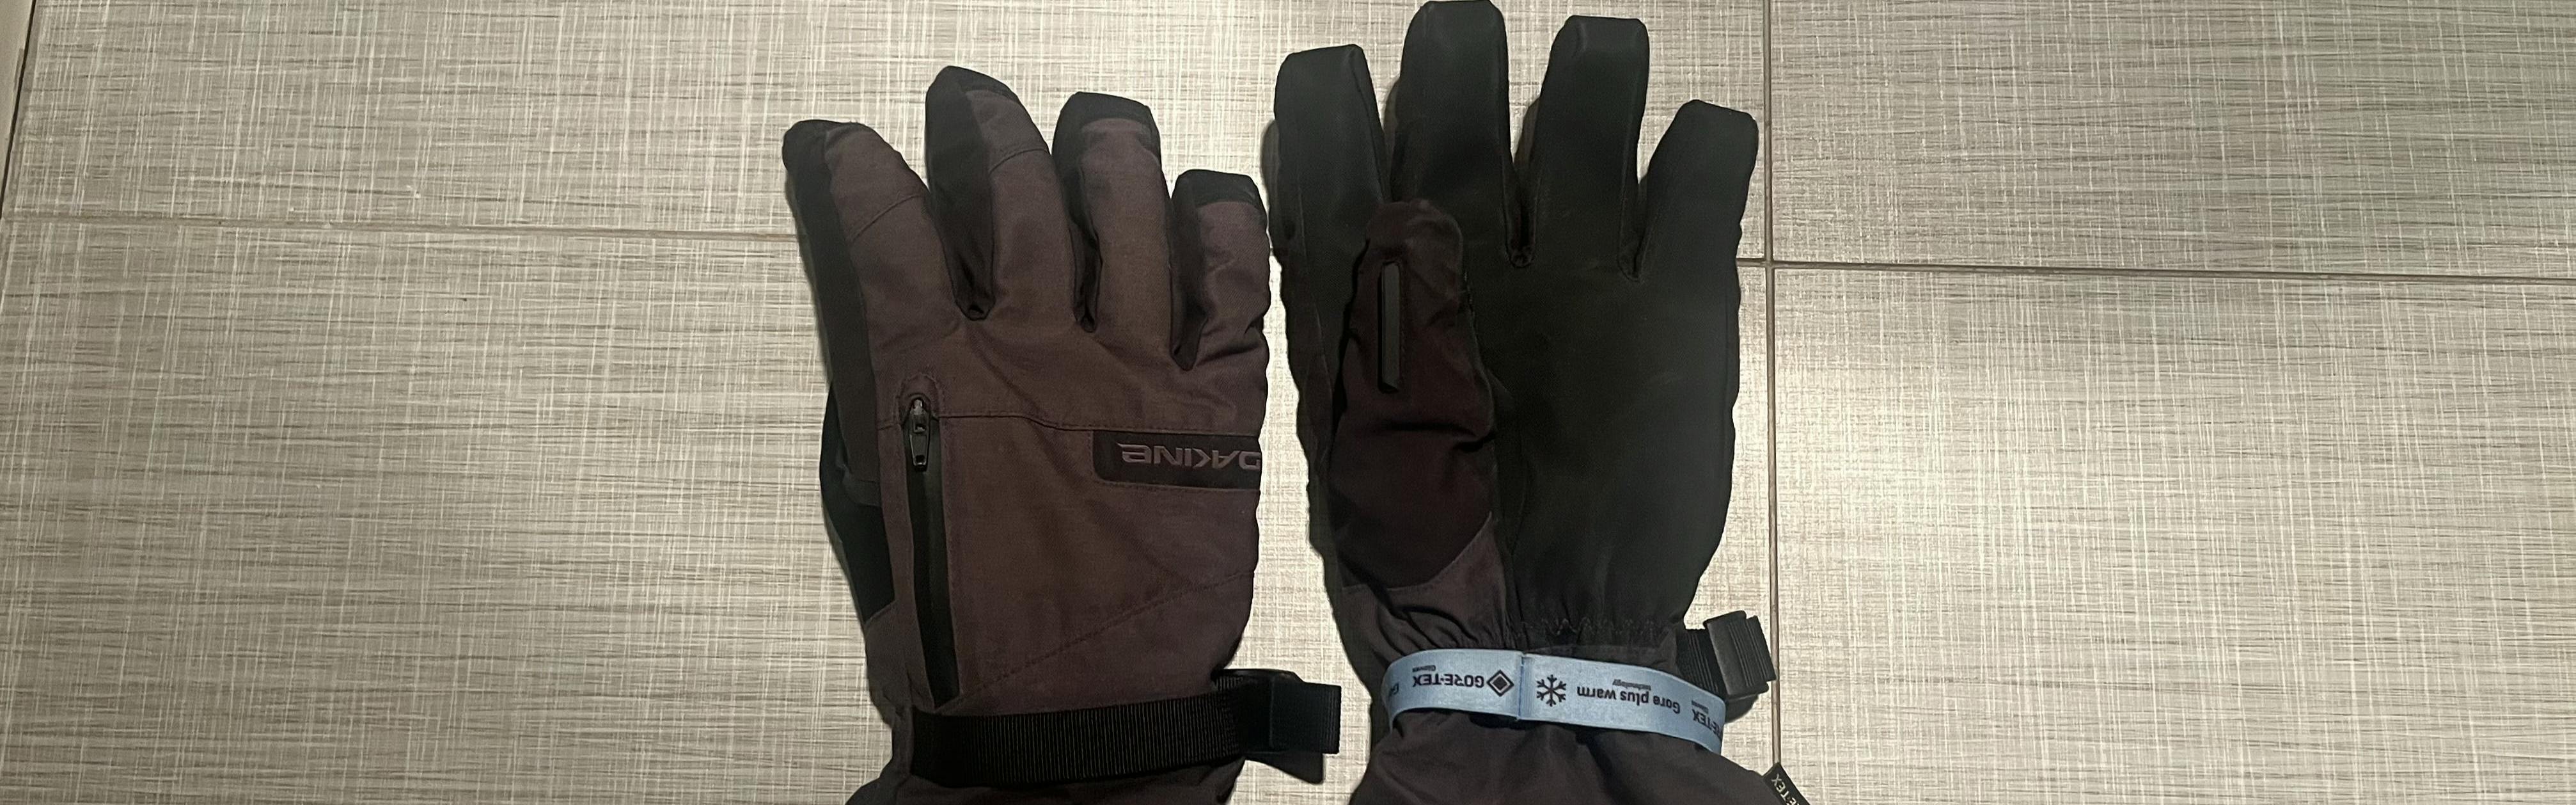 Best Fishing Gloves Guide and Reviews - BC Fishing Journal